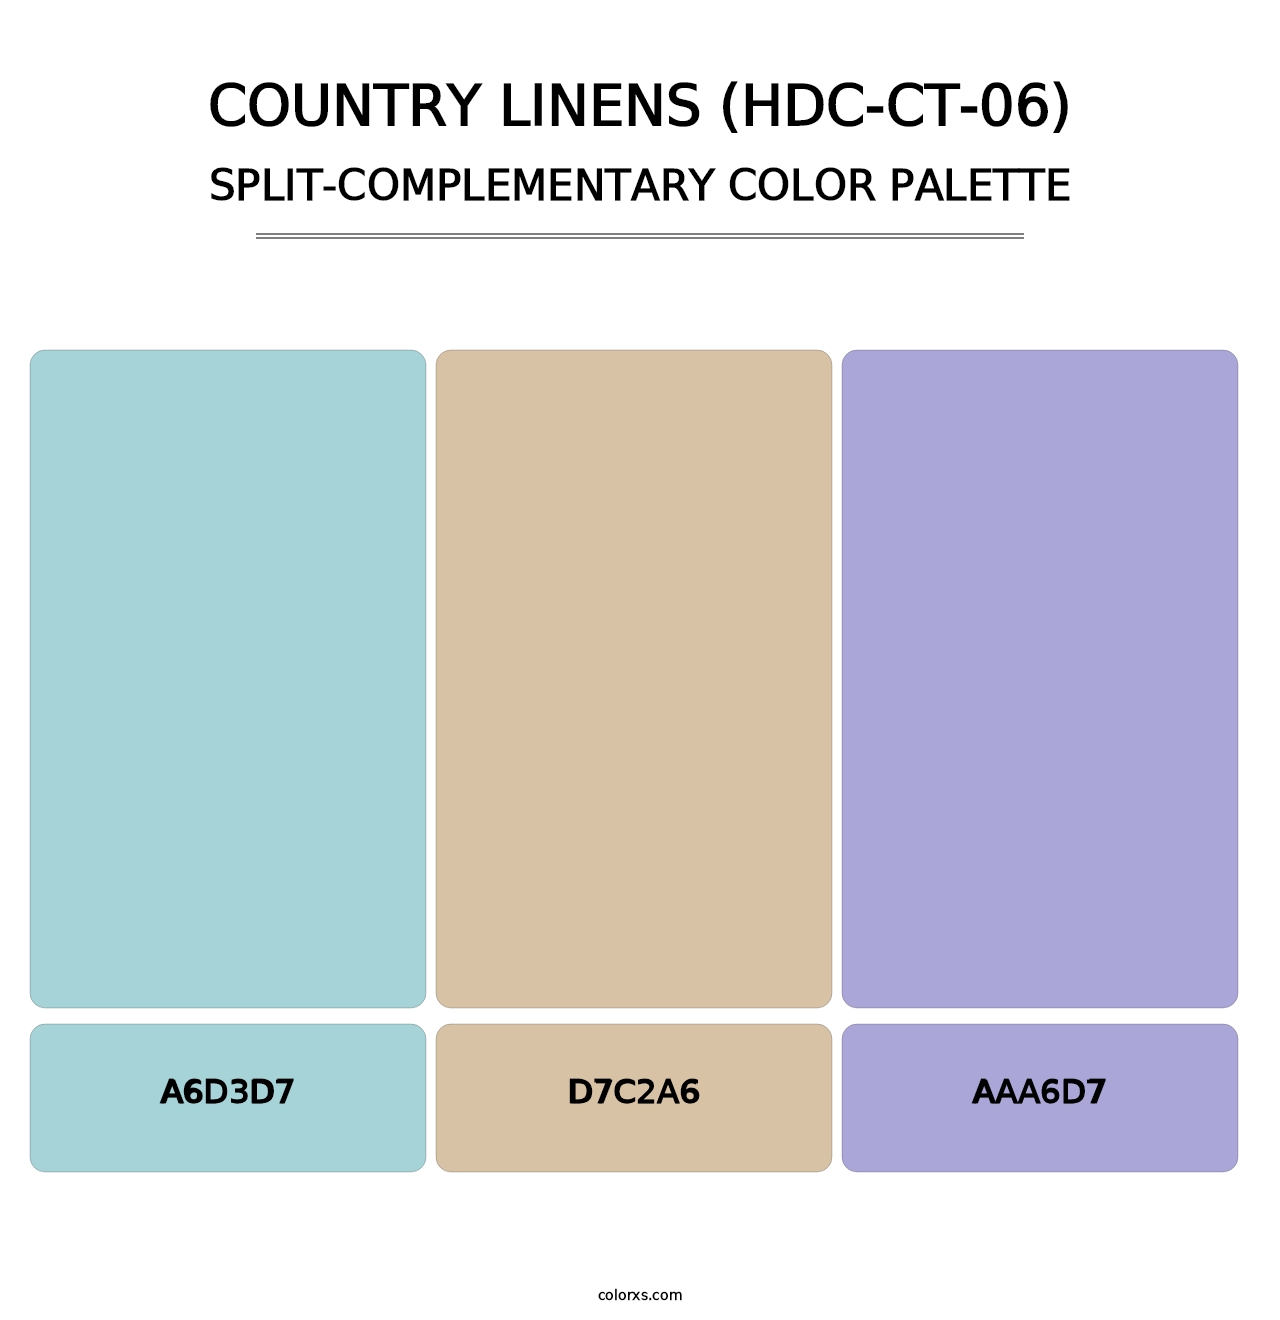 Country Linens (HDC-CT-06) - Split-Complementary Color Palette